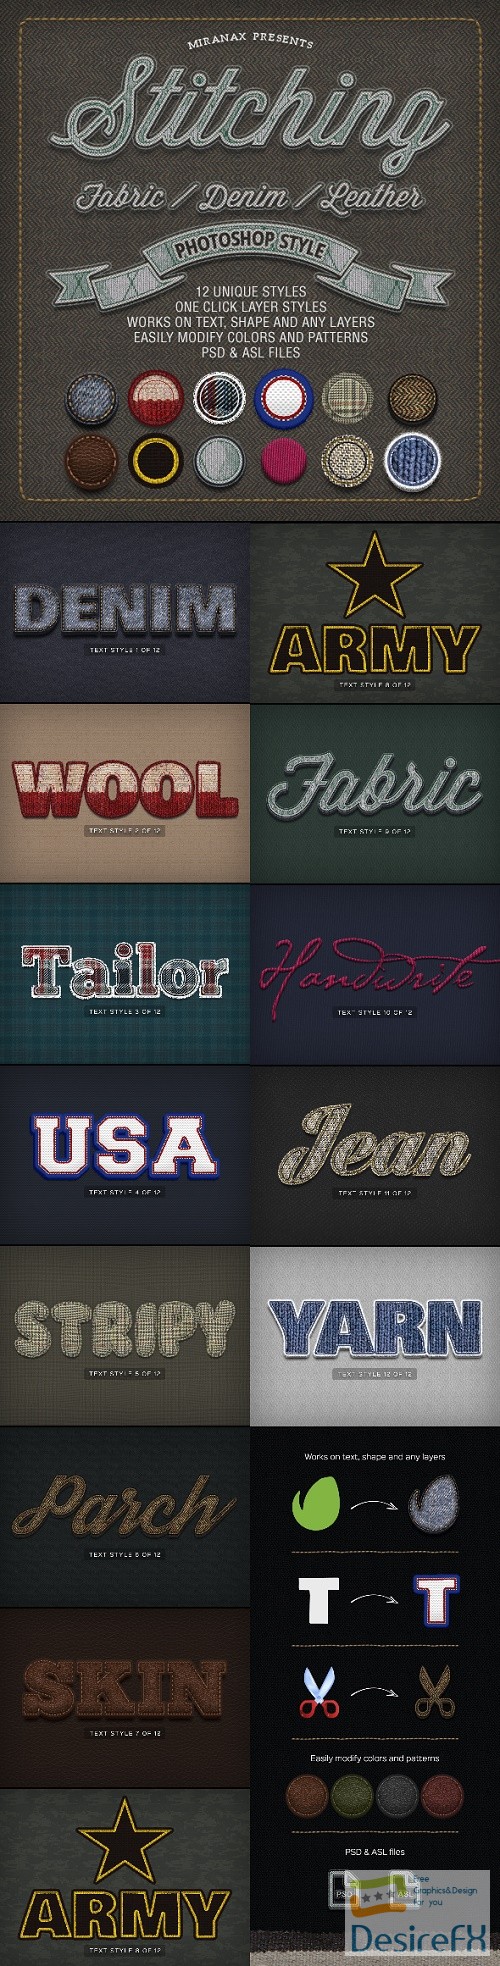 Stitching Fabric - Denim - Leather Text Effects - 8230591